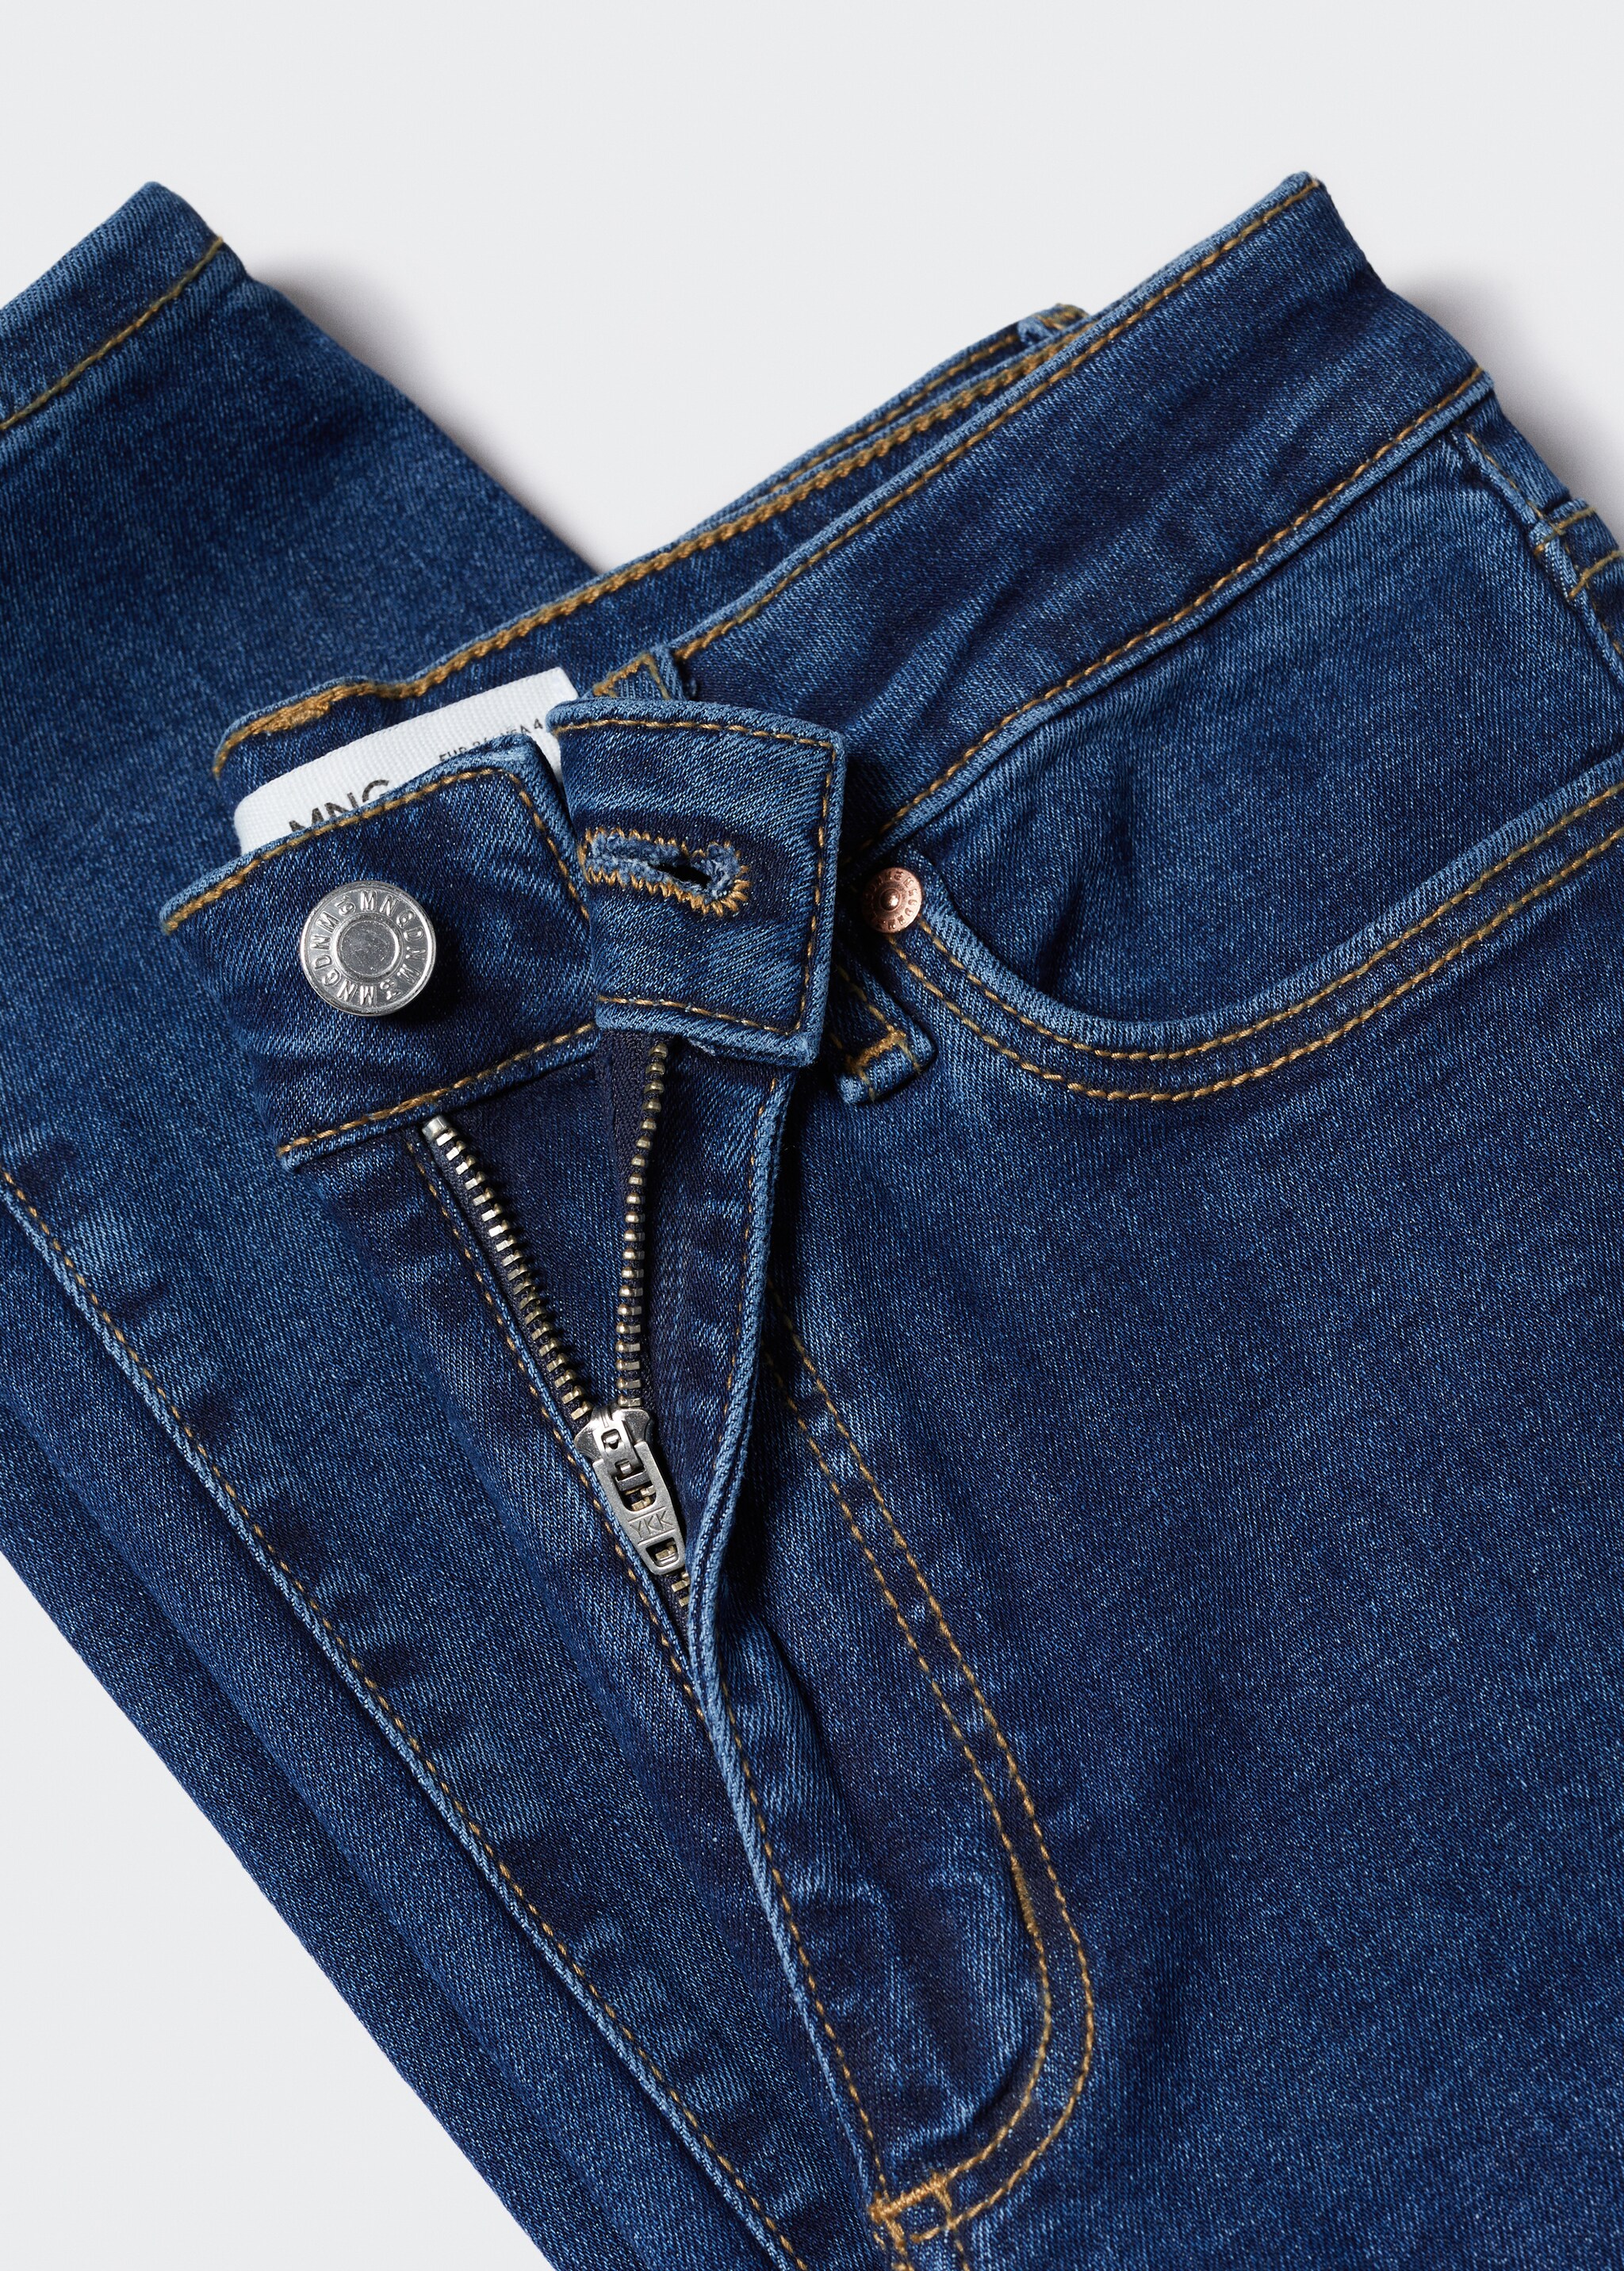 High-rise skinny jeans - Details of the article 8